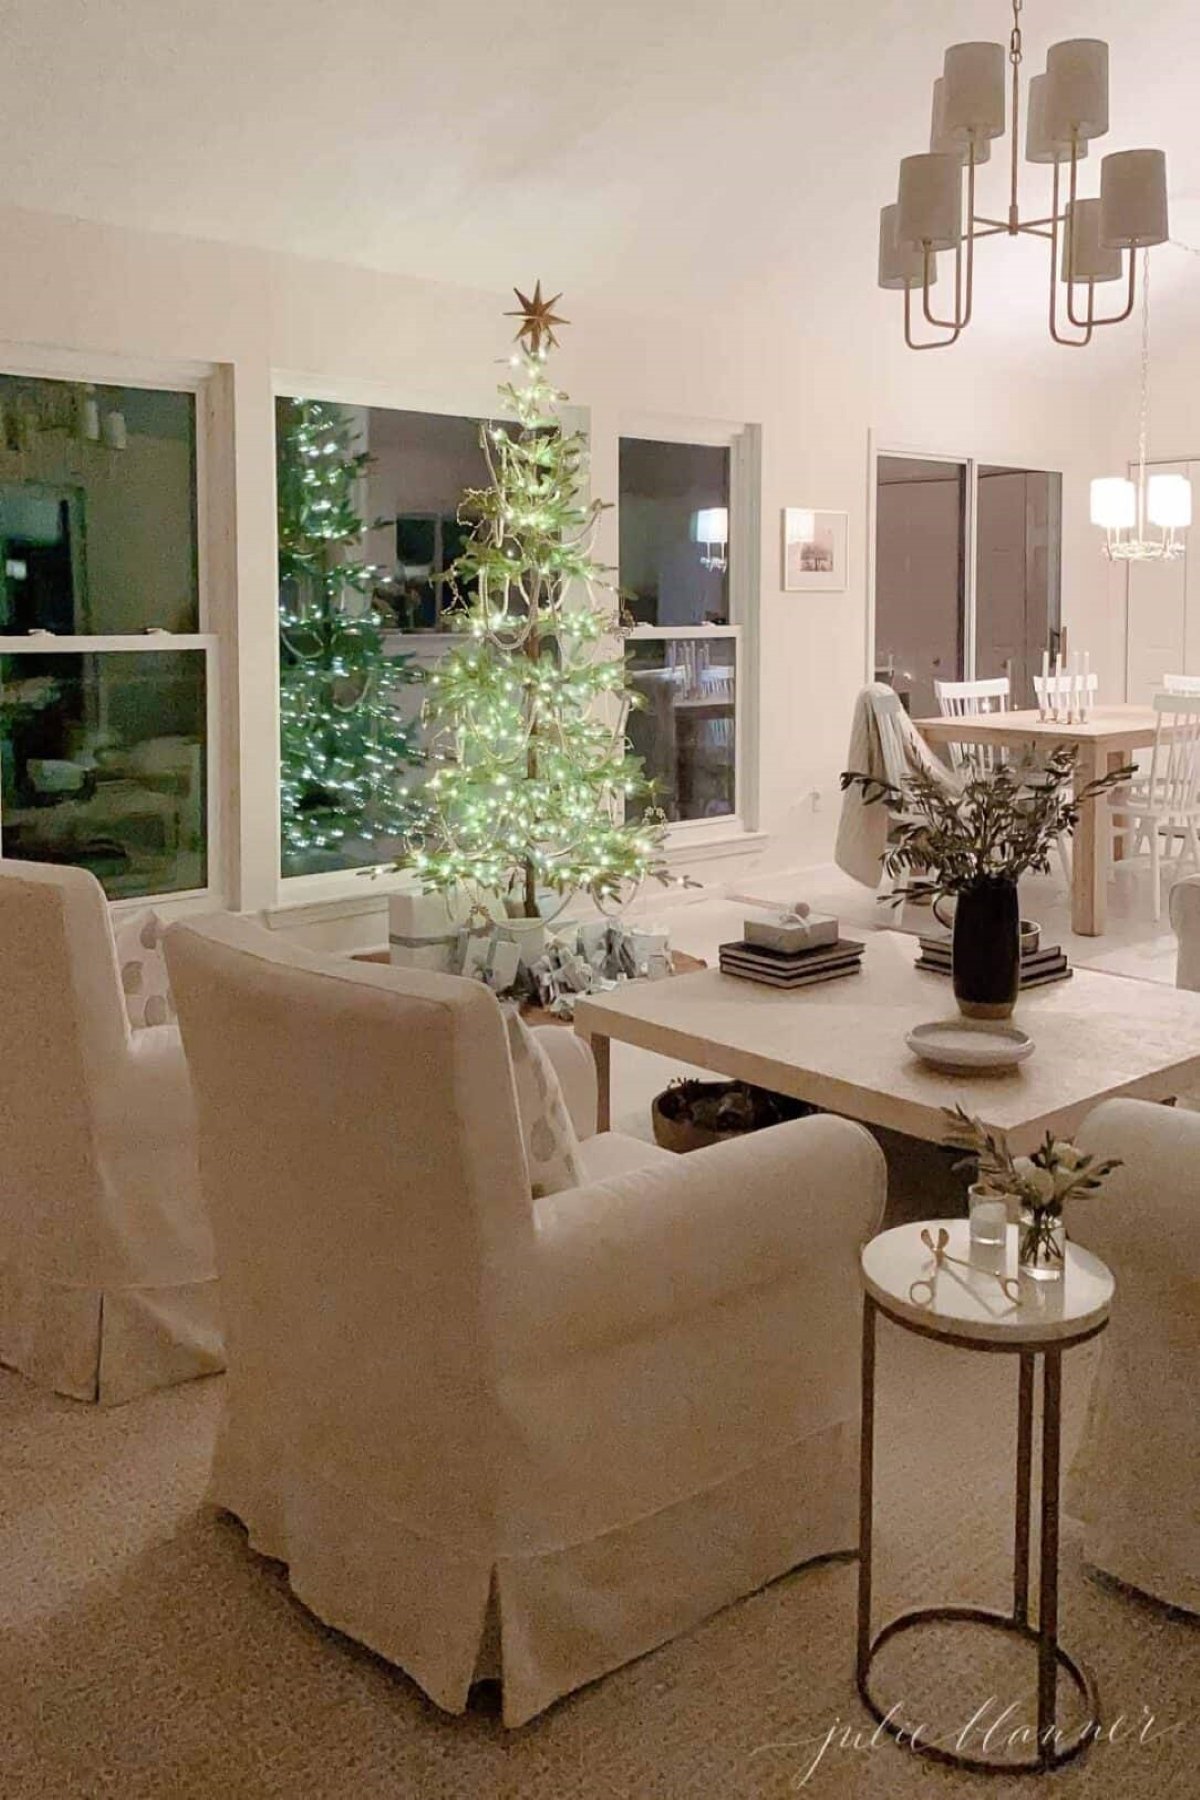 A sparse Christmas tree that lights up at night in a white living room.